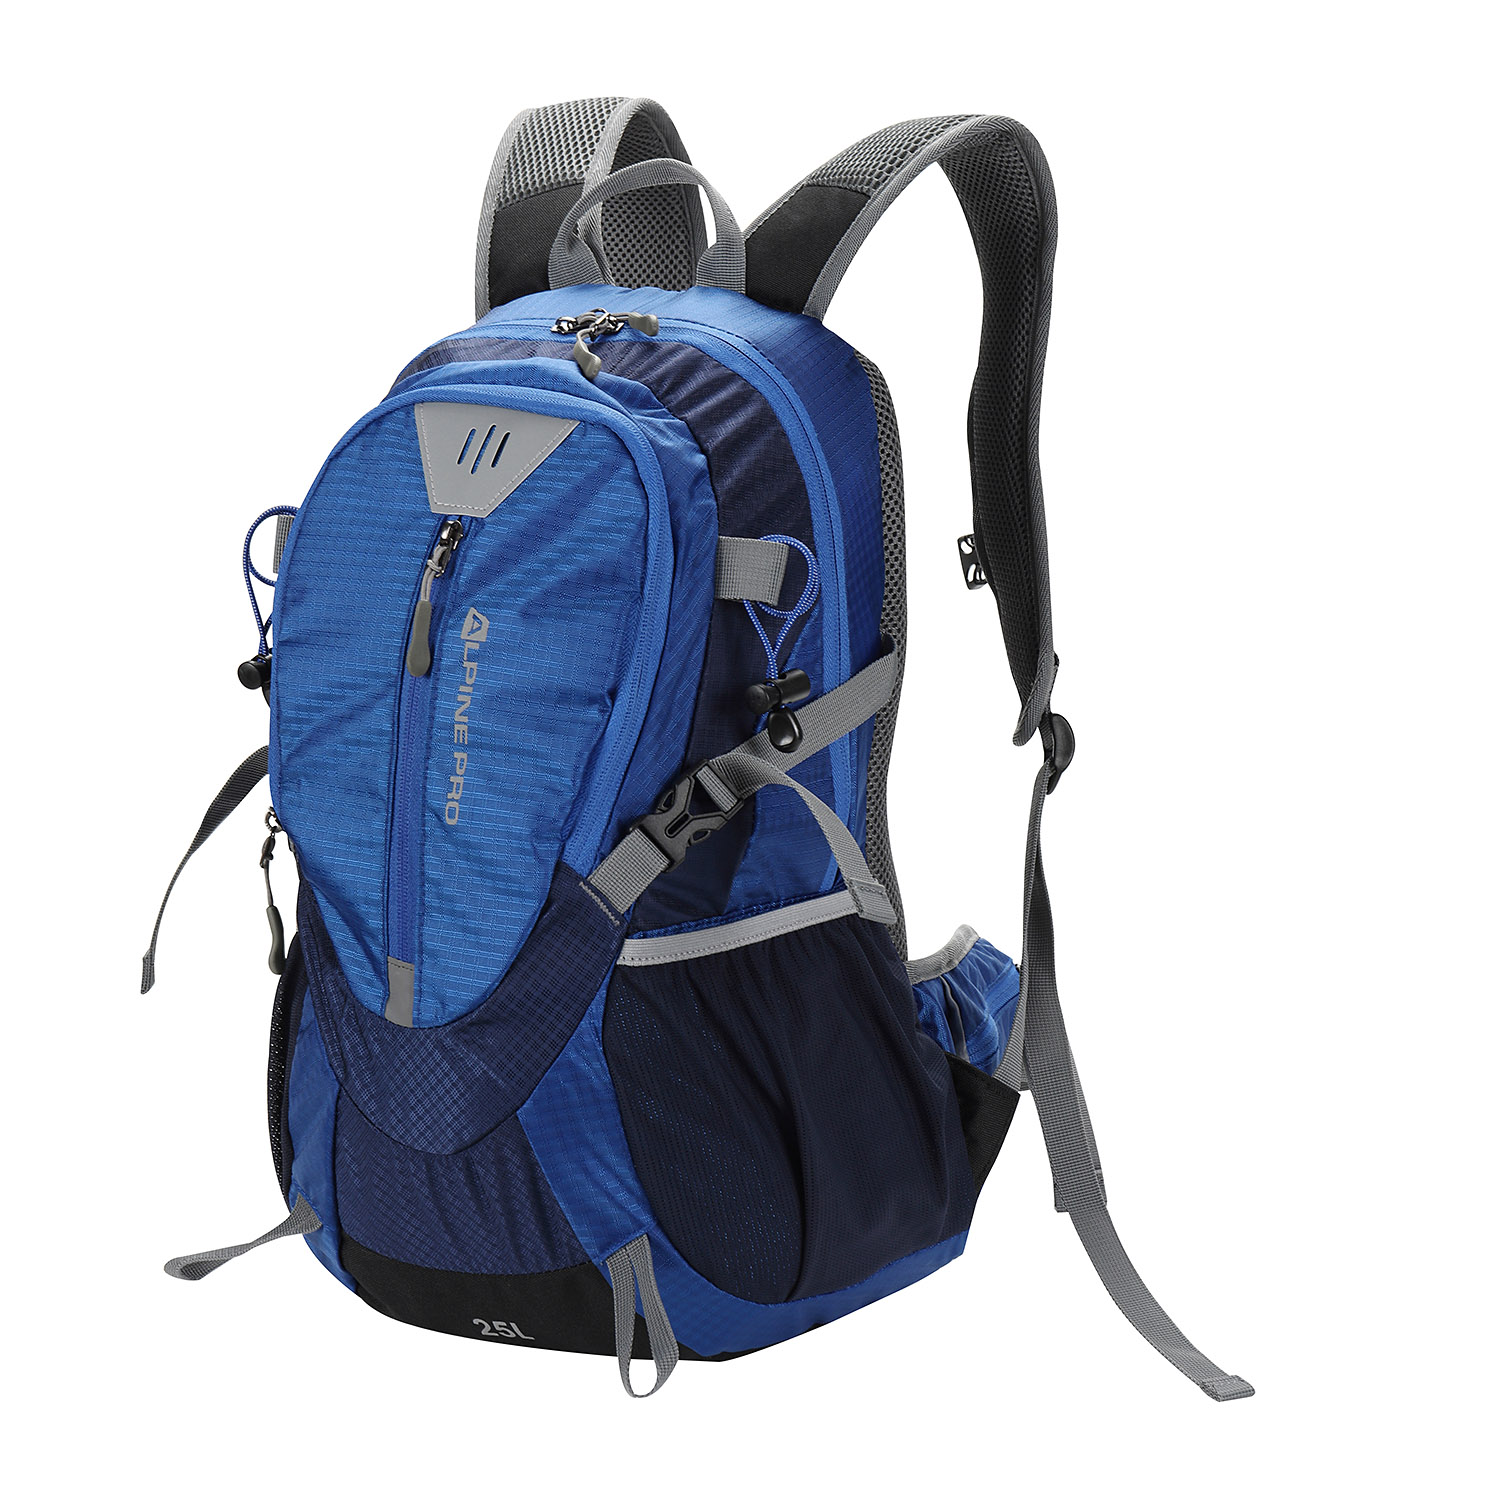 Outdoor backpack 25l ALPINE PRO OSEWE classic blue